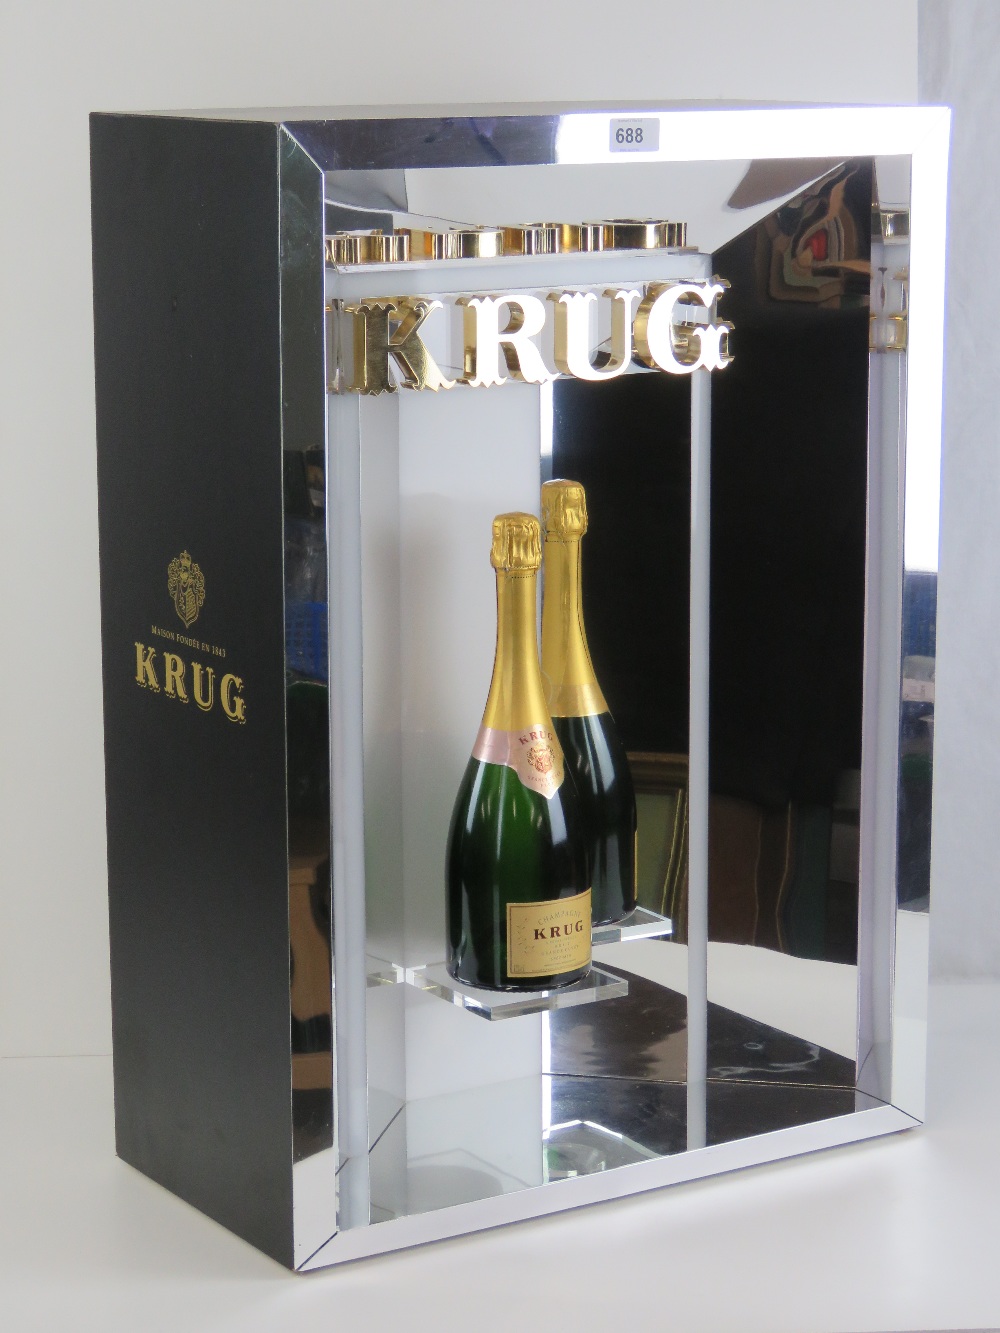 A contemporary illuminated Krug champagne bar display complete with Krug Brut Grant Cuvee display